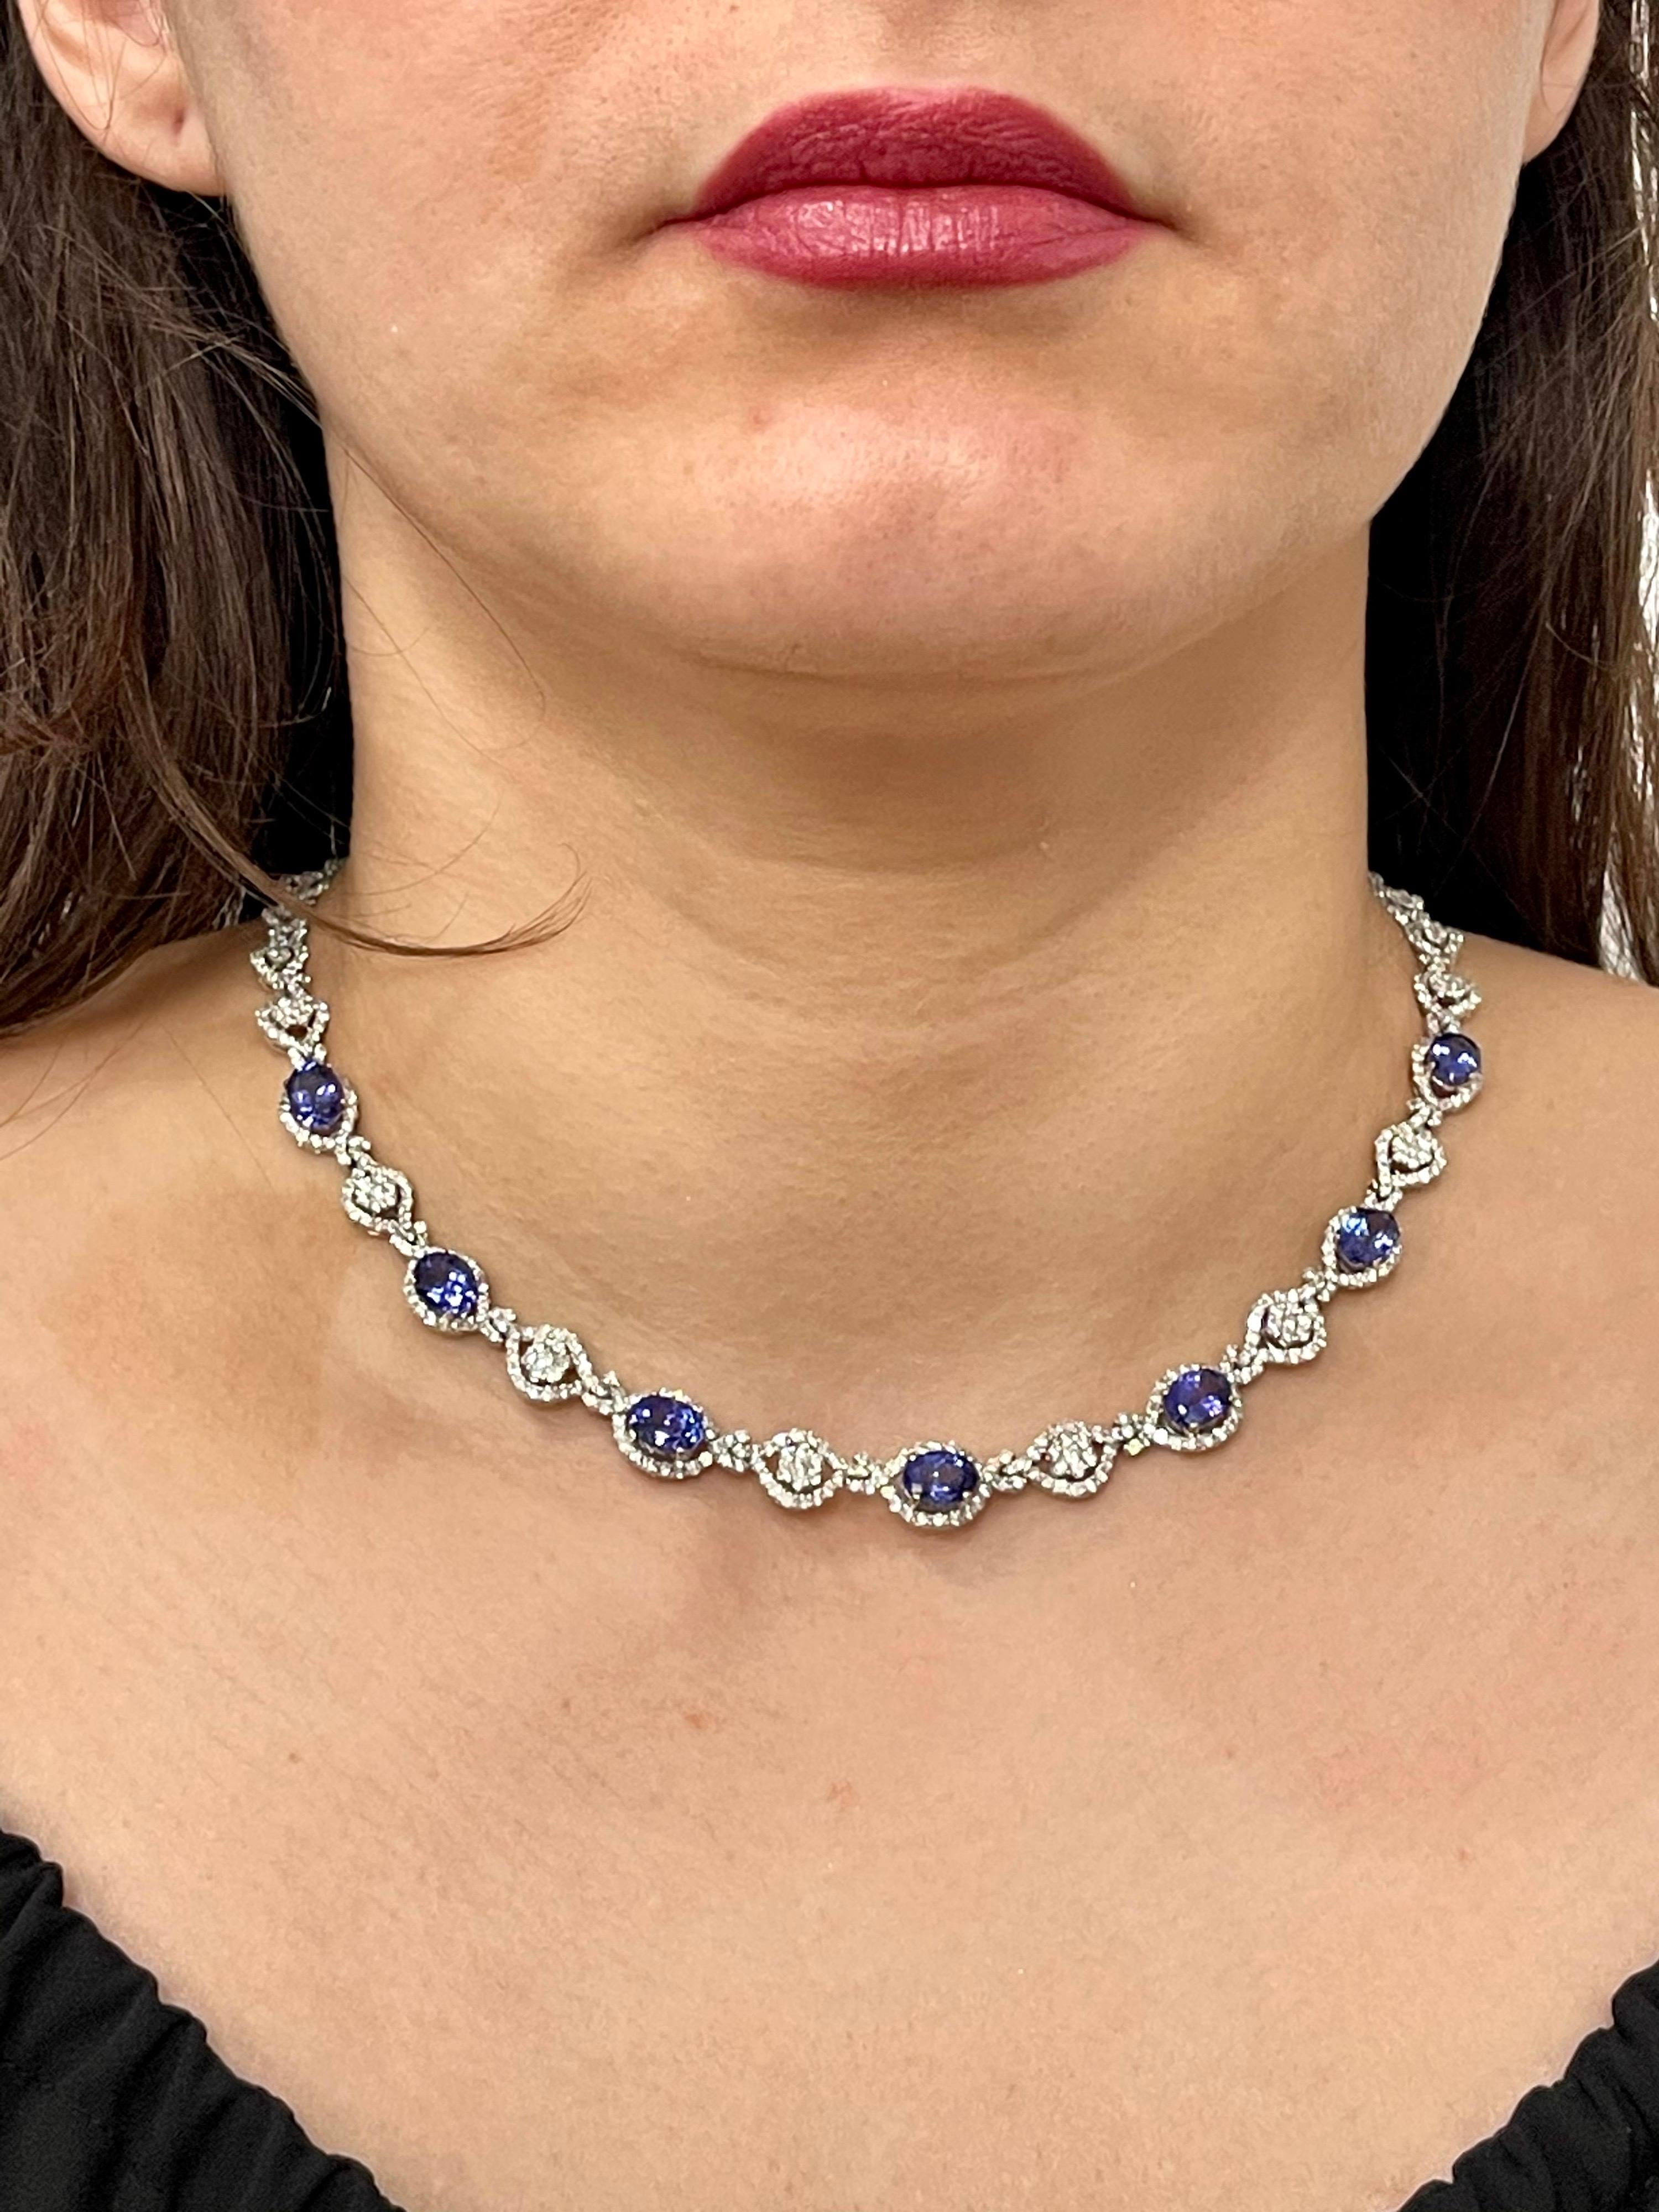 11 Carat Oval Tanzanite and 12 Carat Diamonds Necklace 18 Karat Gold Estate In Excellent Condition For Sale In New York, NY